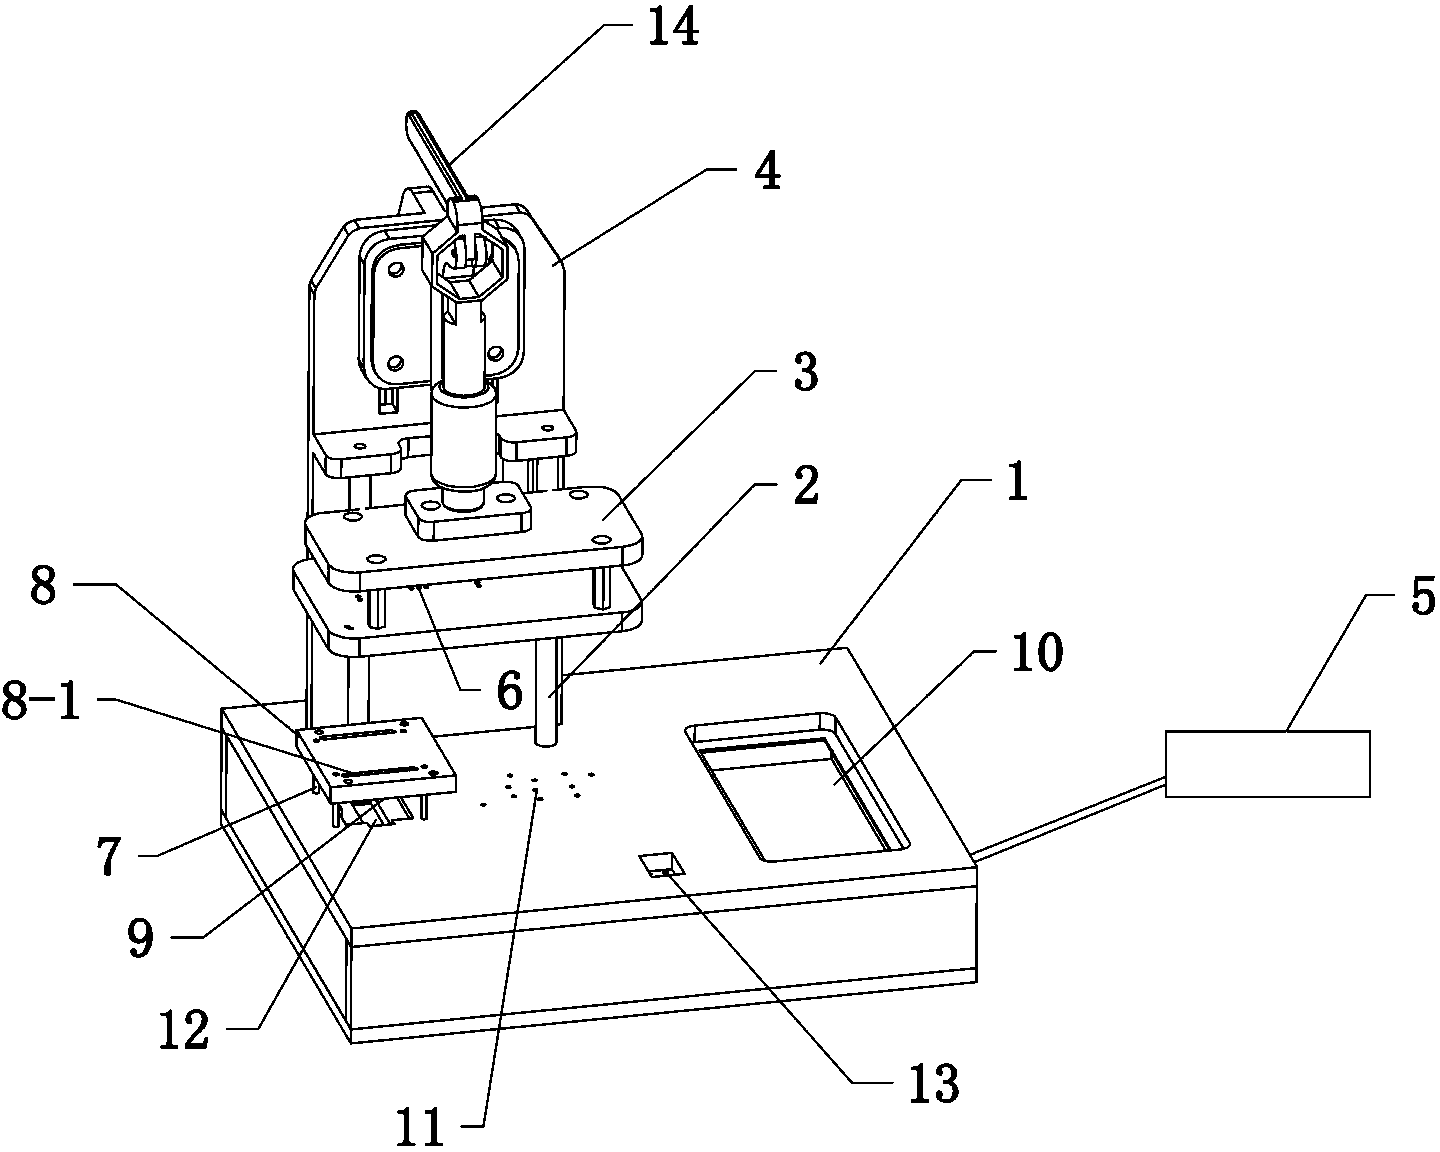 Circuit board detection device of remote control